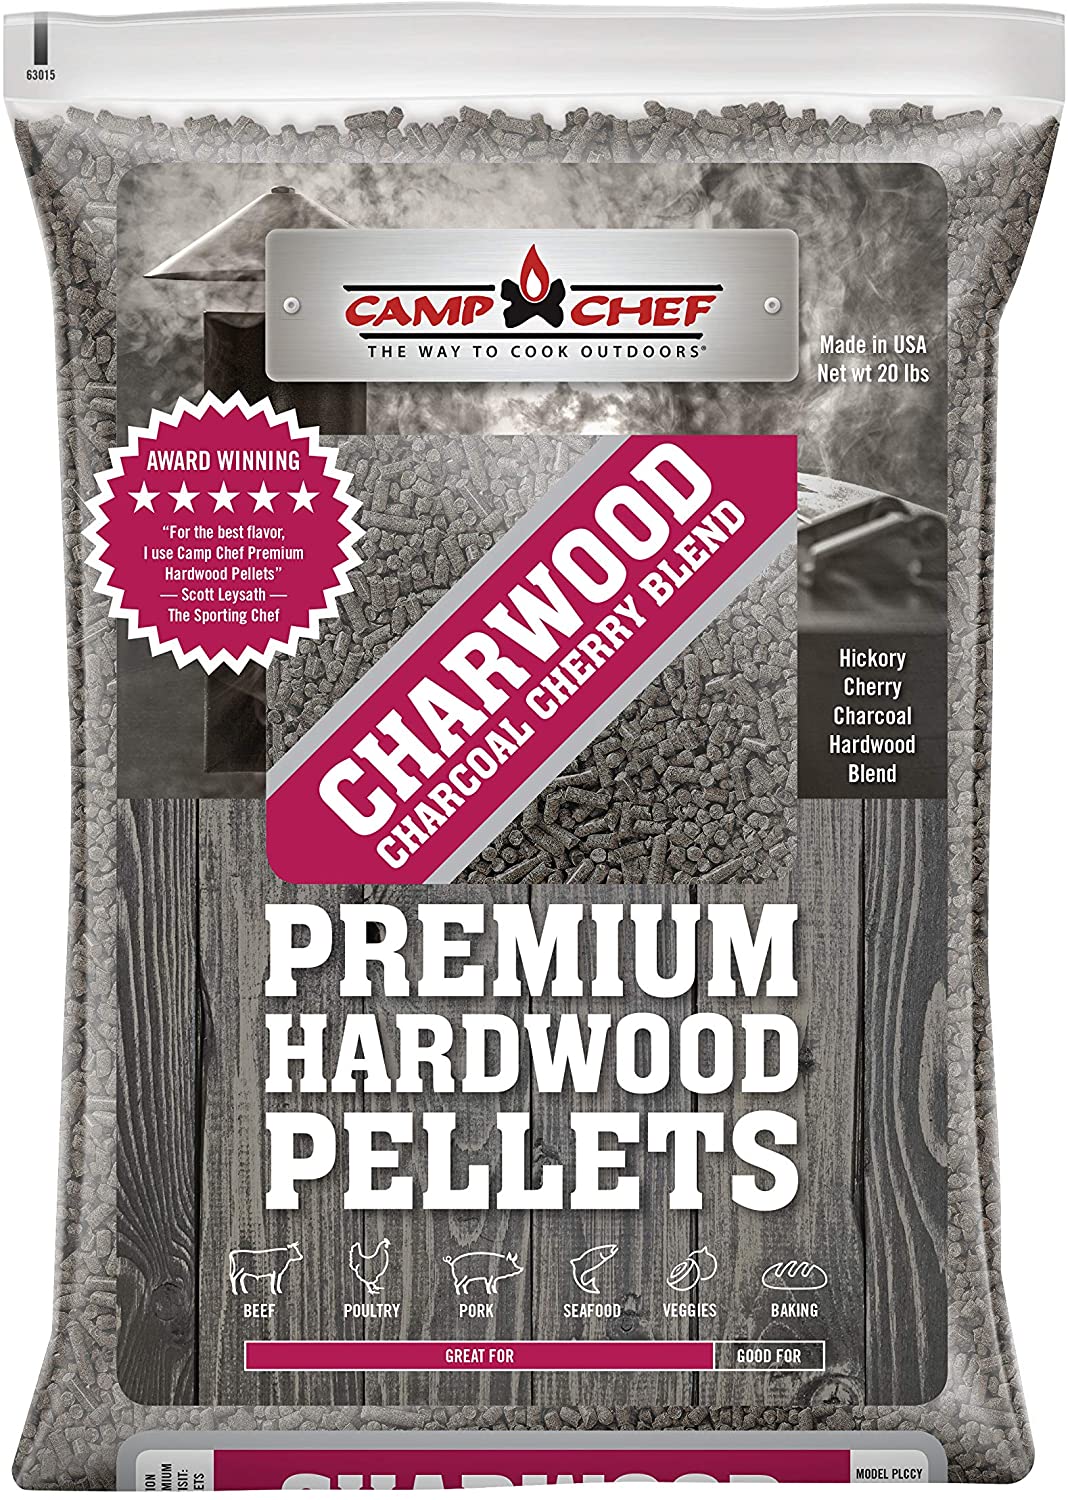 ompetition Blend/Charwood Charcoal Cherry/Charwood Charcoal Hickory (3 Bags - 20 lbs/Each Bag) - PLCBCYCHK